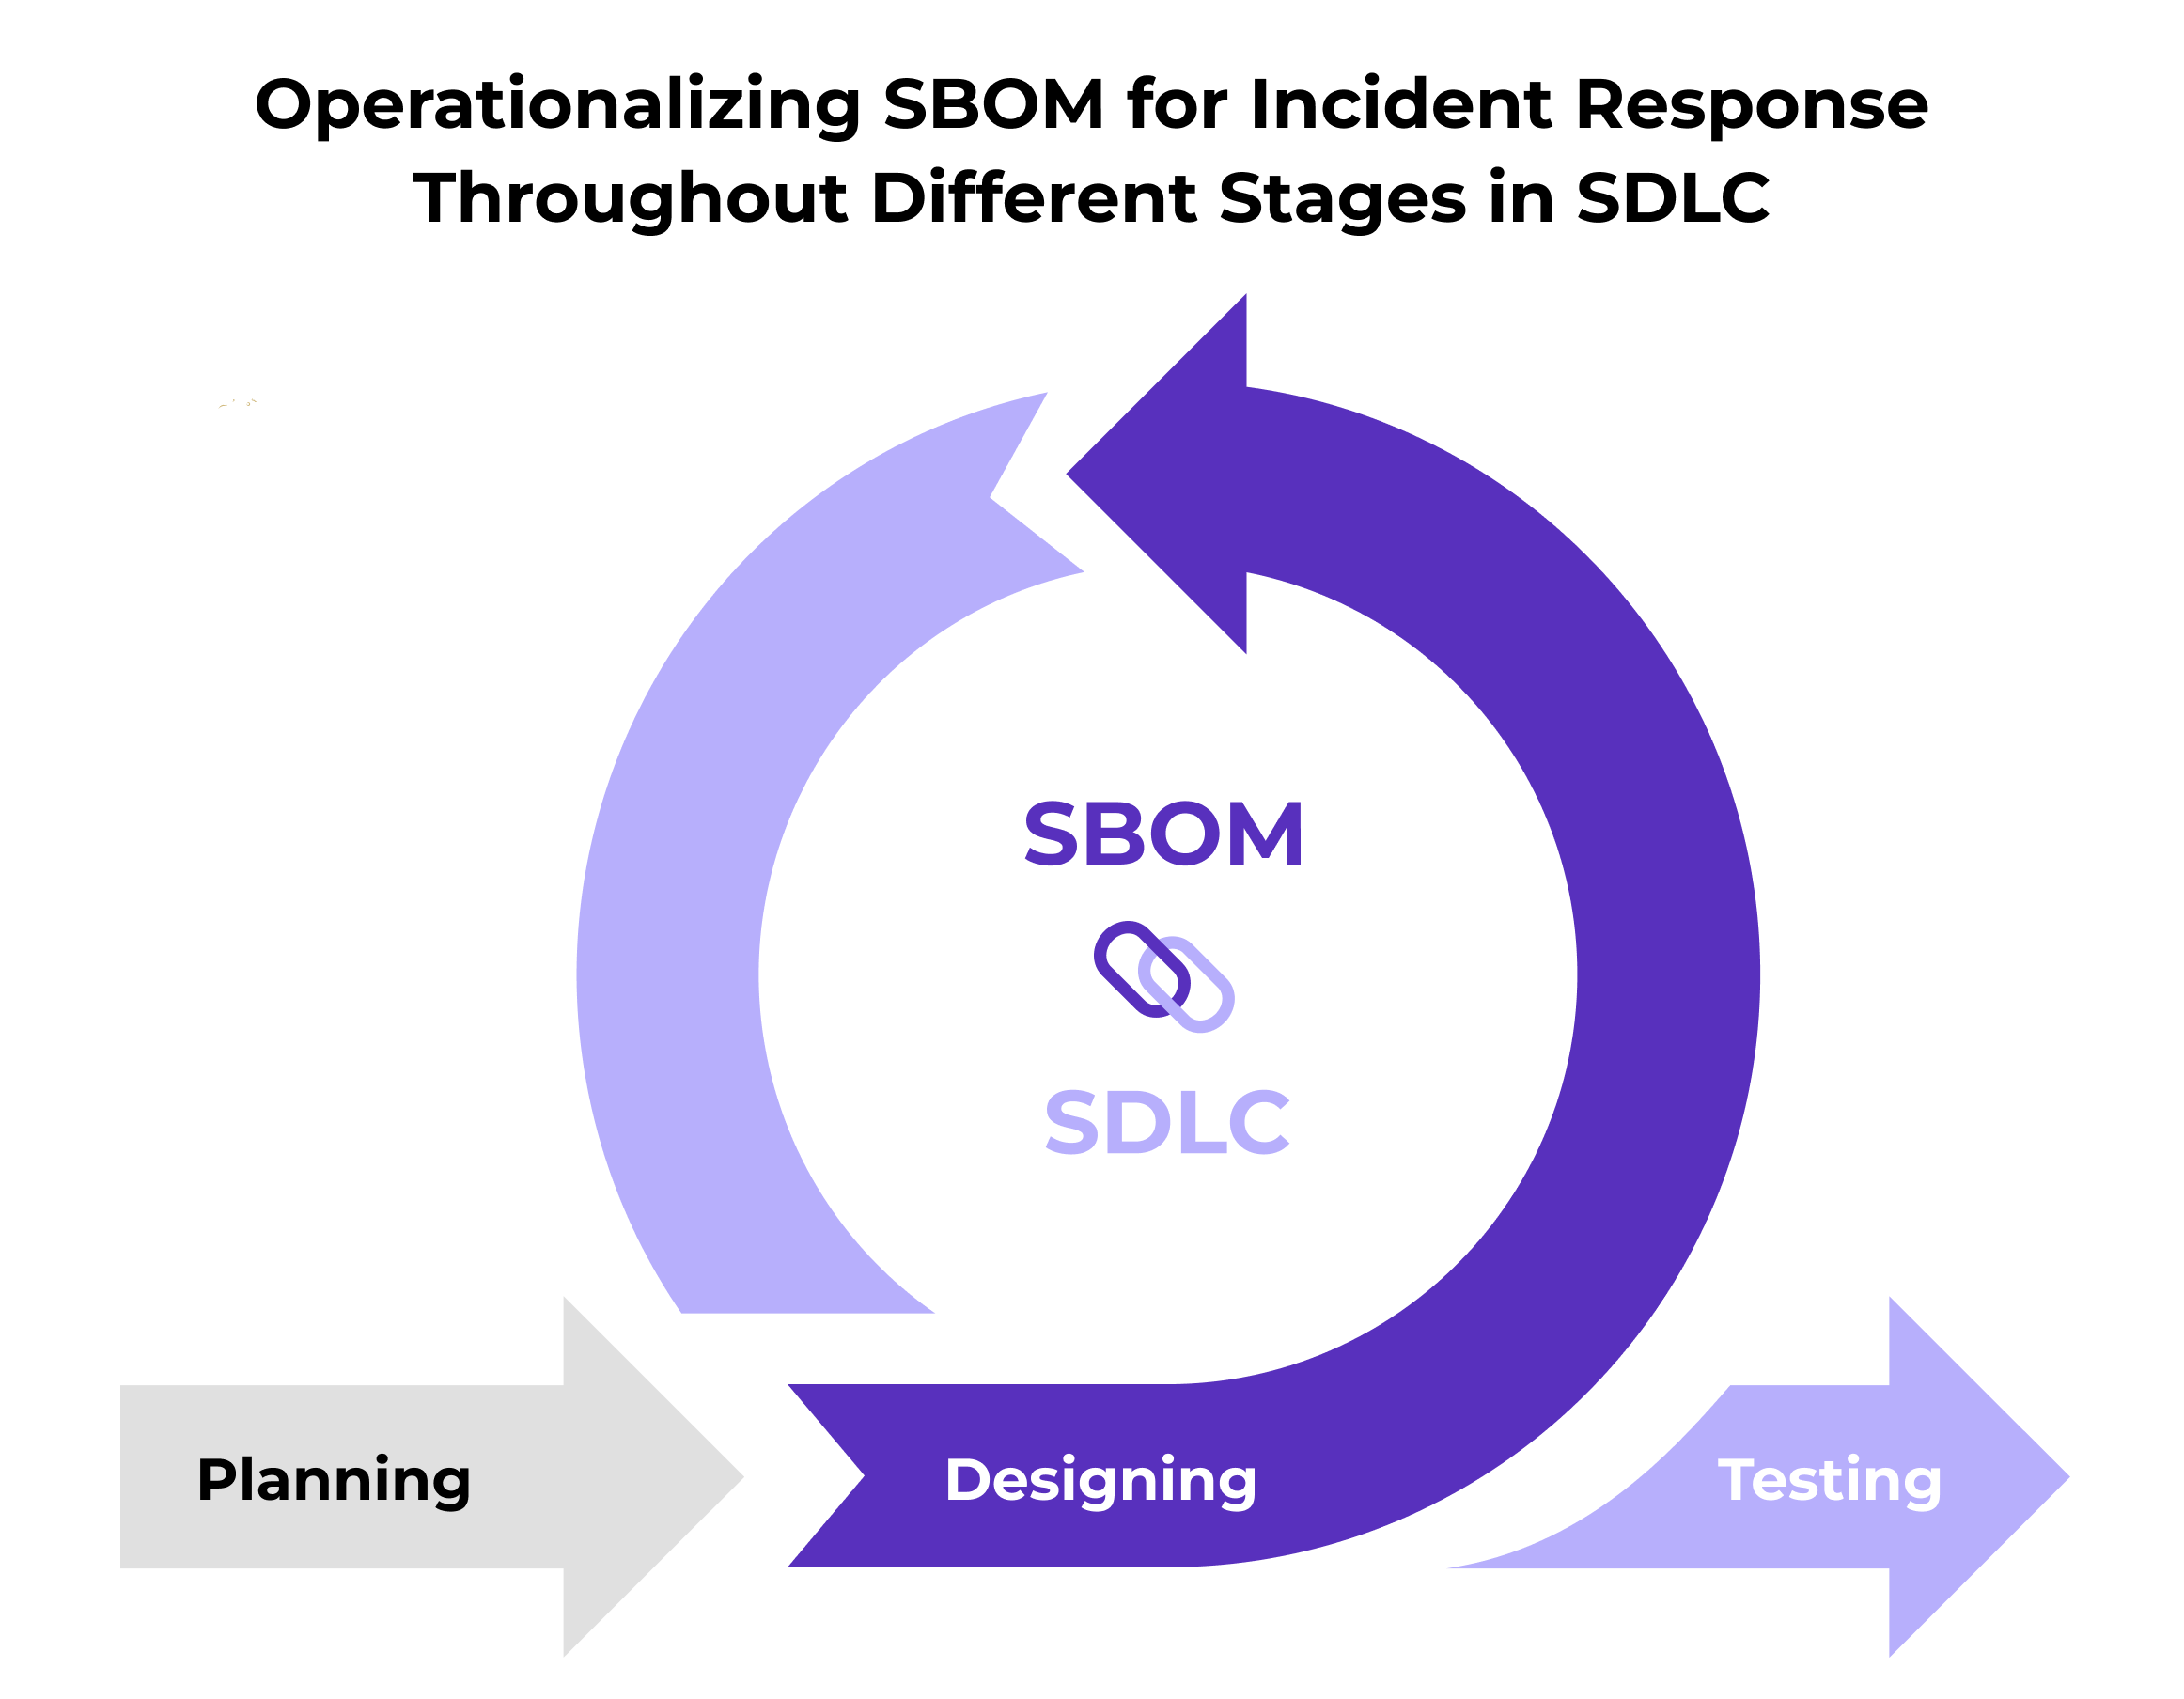 Operationalizing SBOM for Incident Response Throughout Different Stages in SDLC